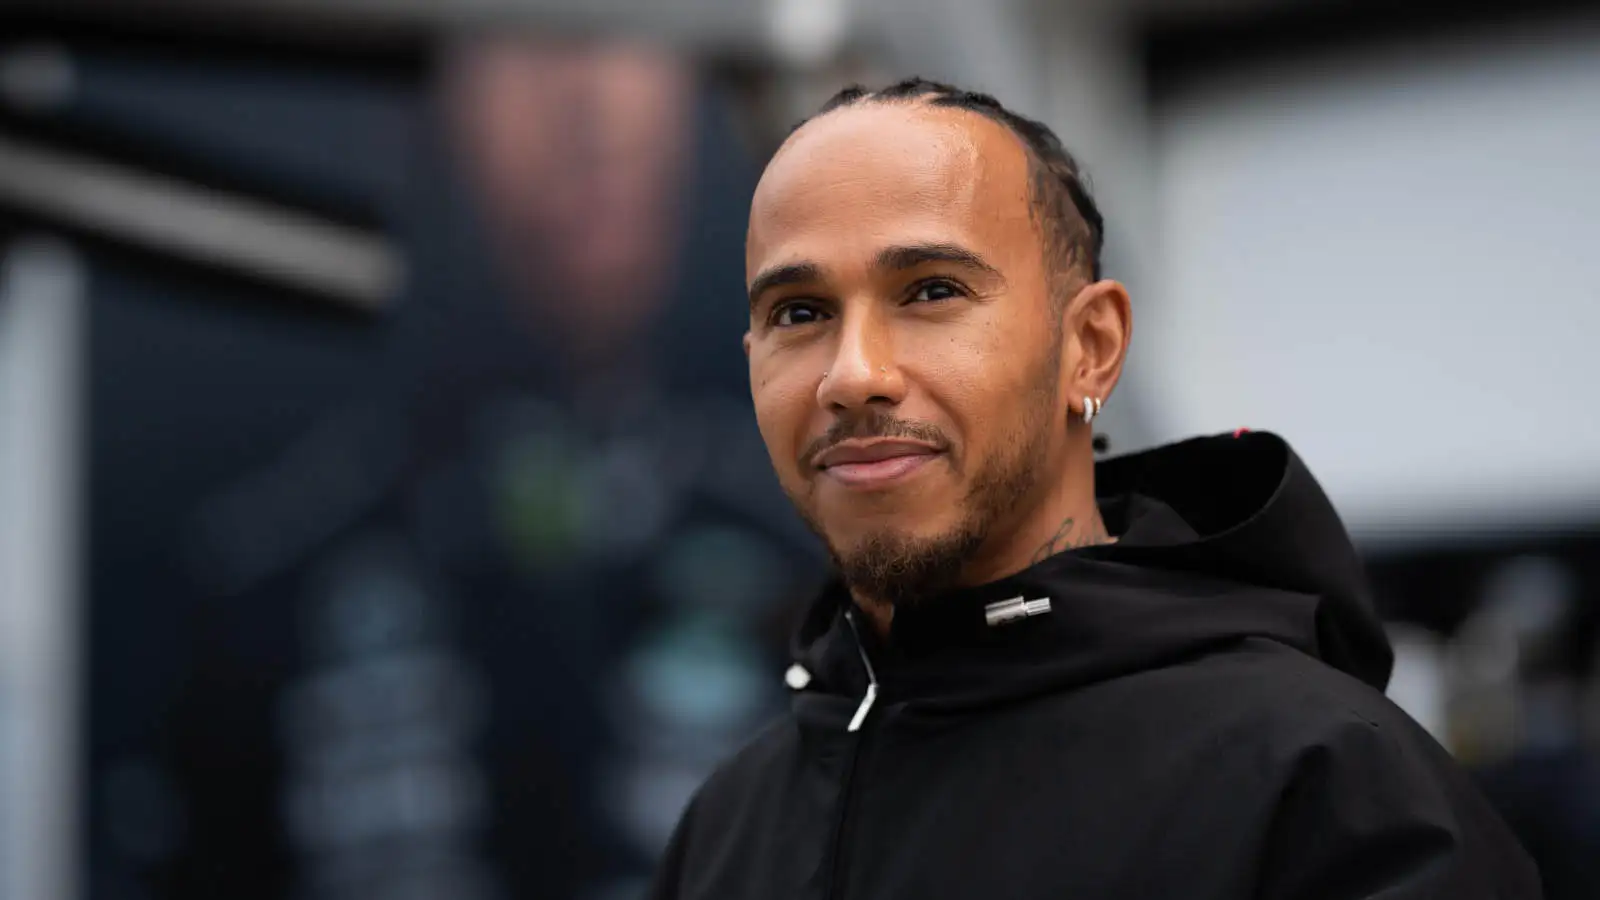 Lewis Hamilton arrives at the circuit. Montreal June 2023. F1 news